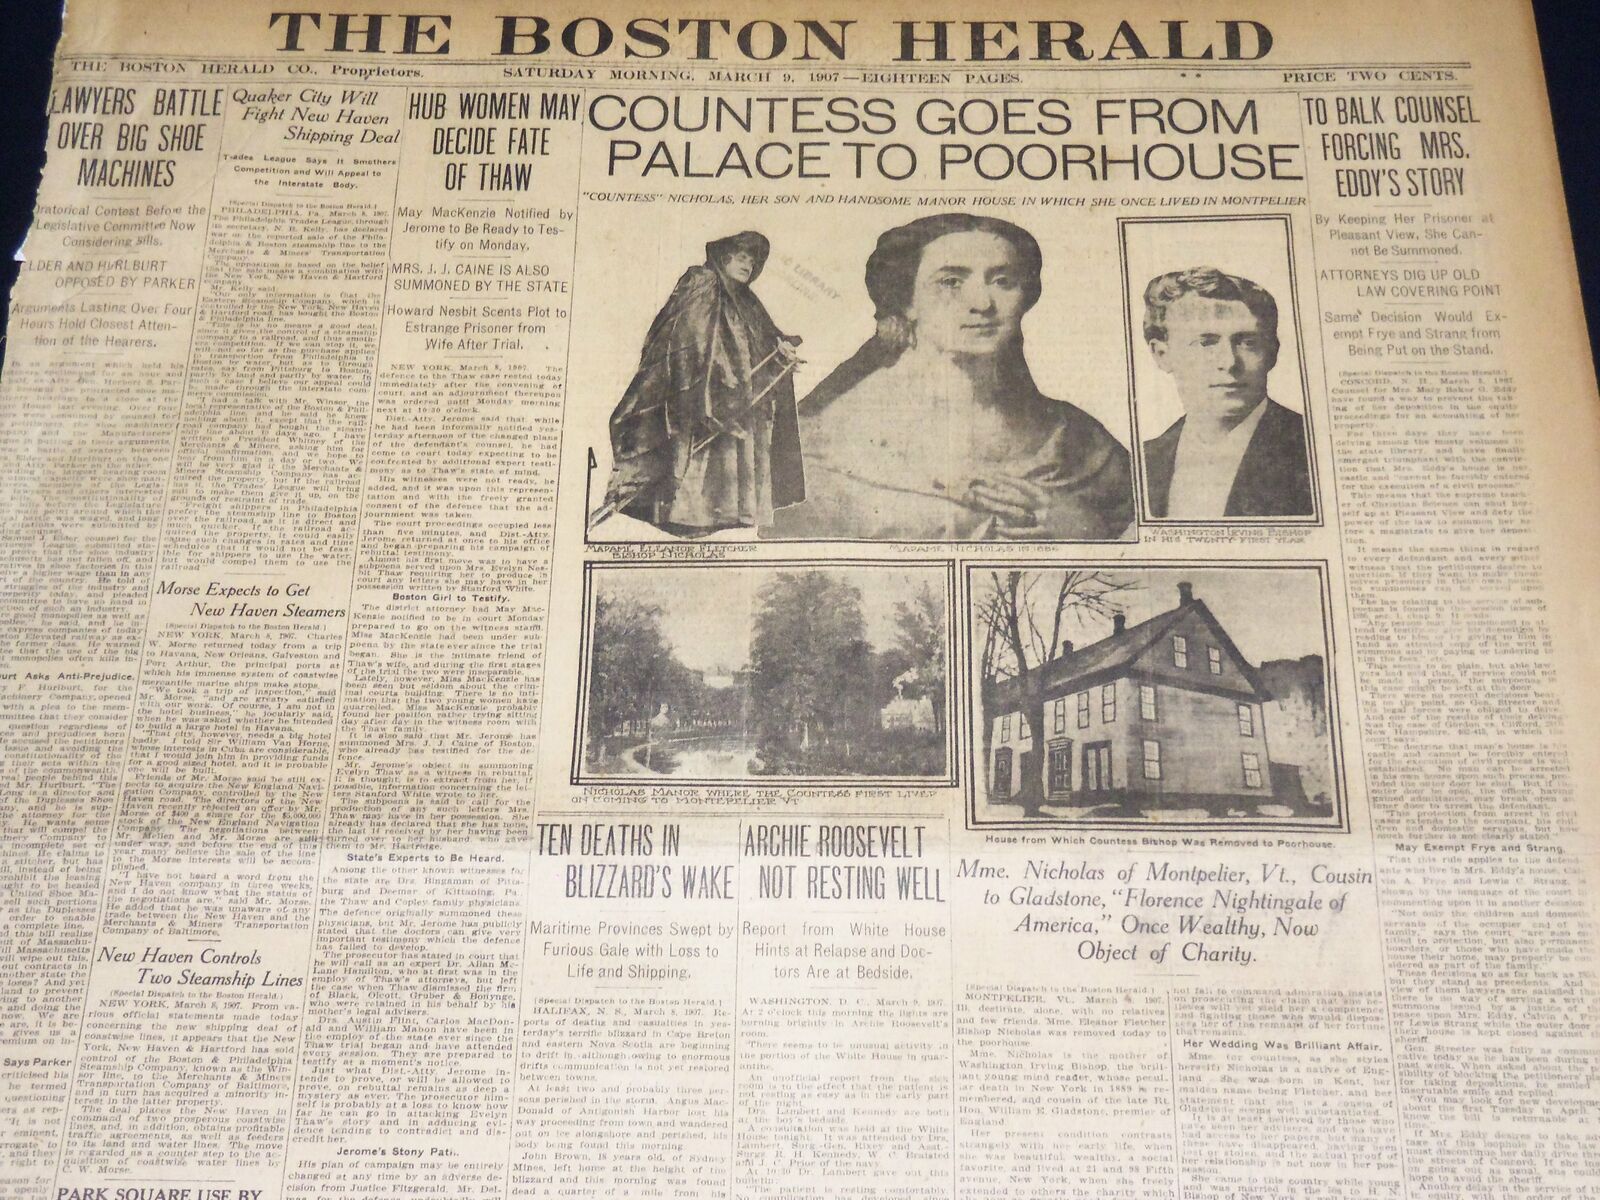 1907 MARCH 9 THE BOSTON HERALD -COUNTESS GOES FROM PALACE TO POOR HOUSE - BH 388